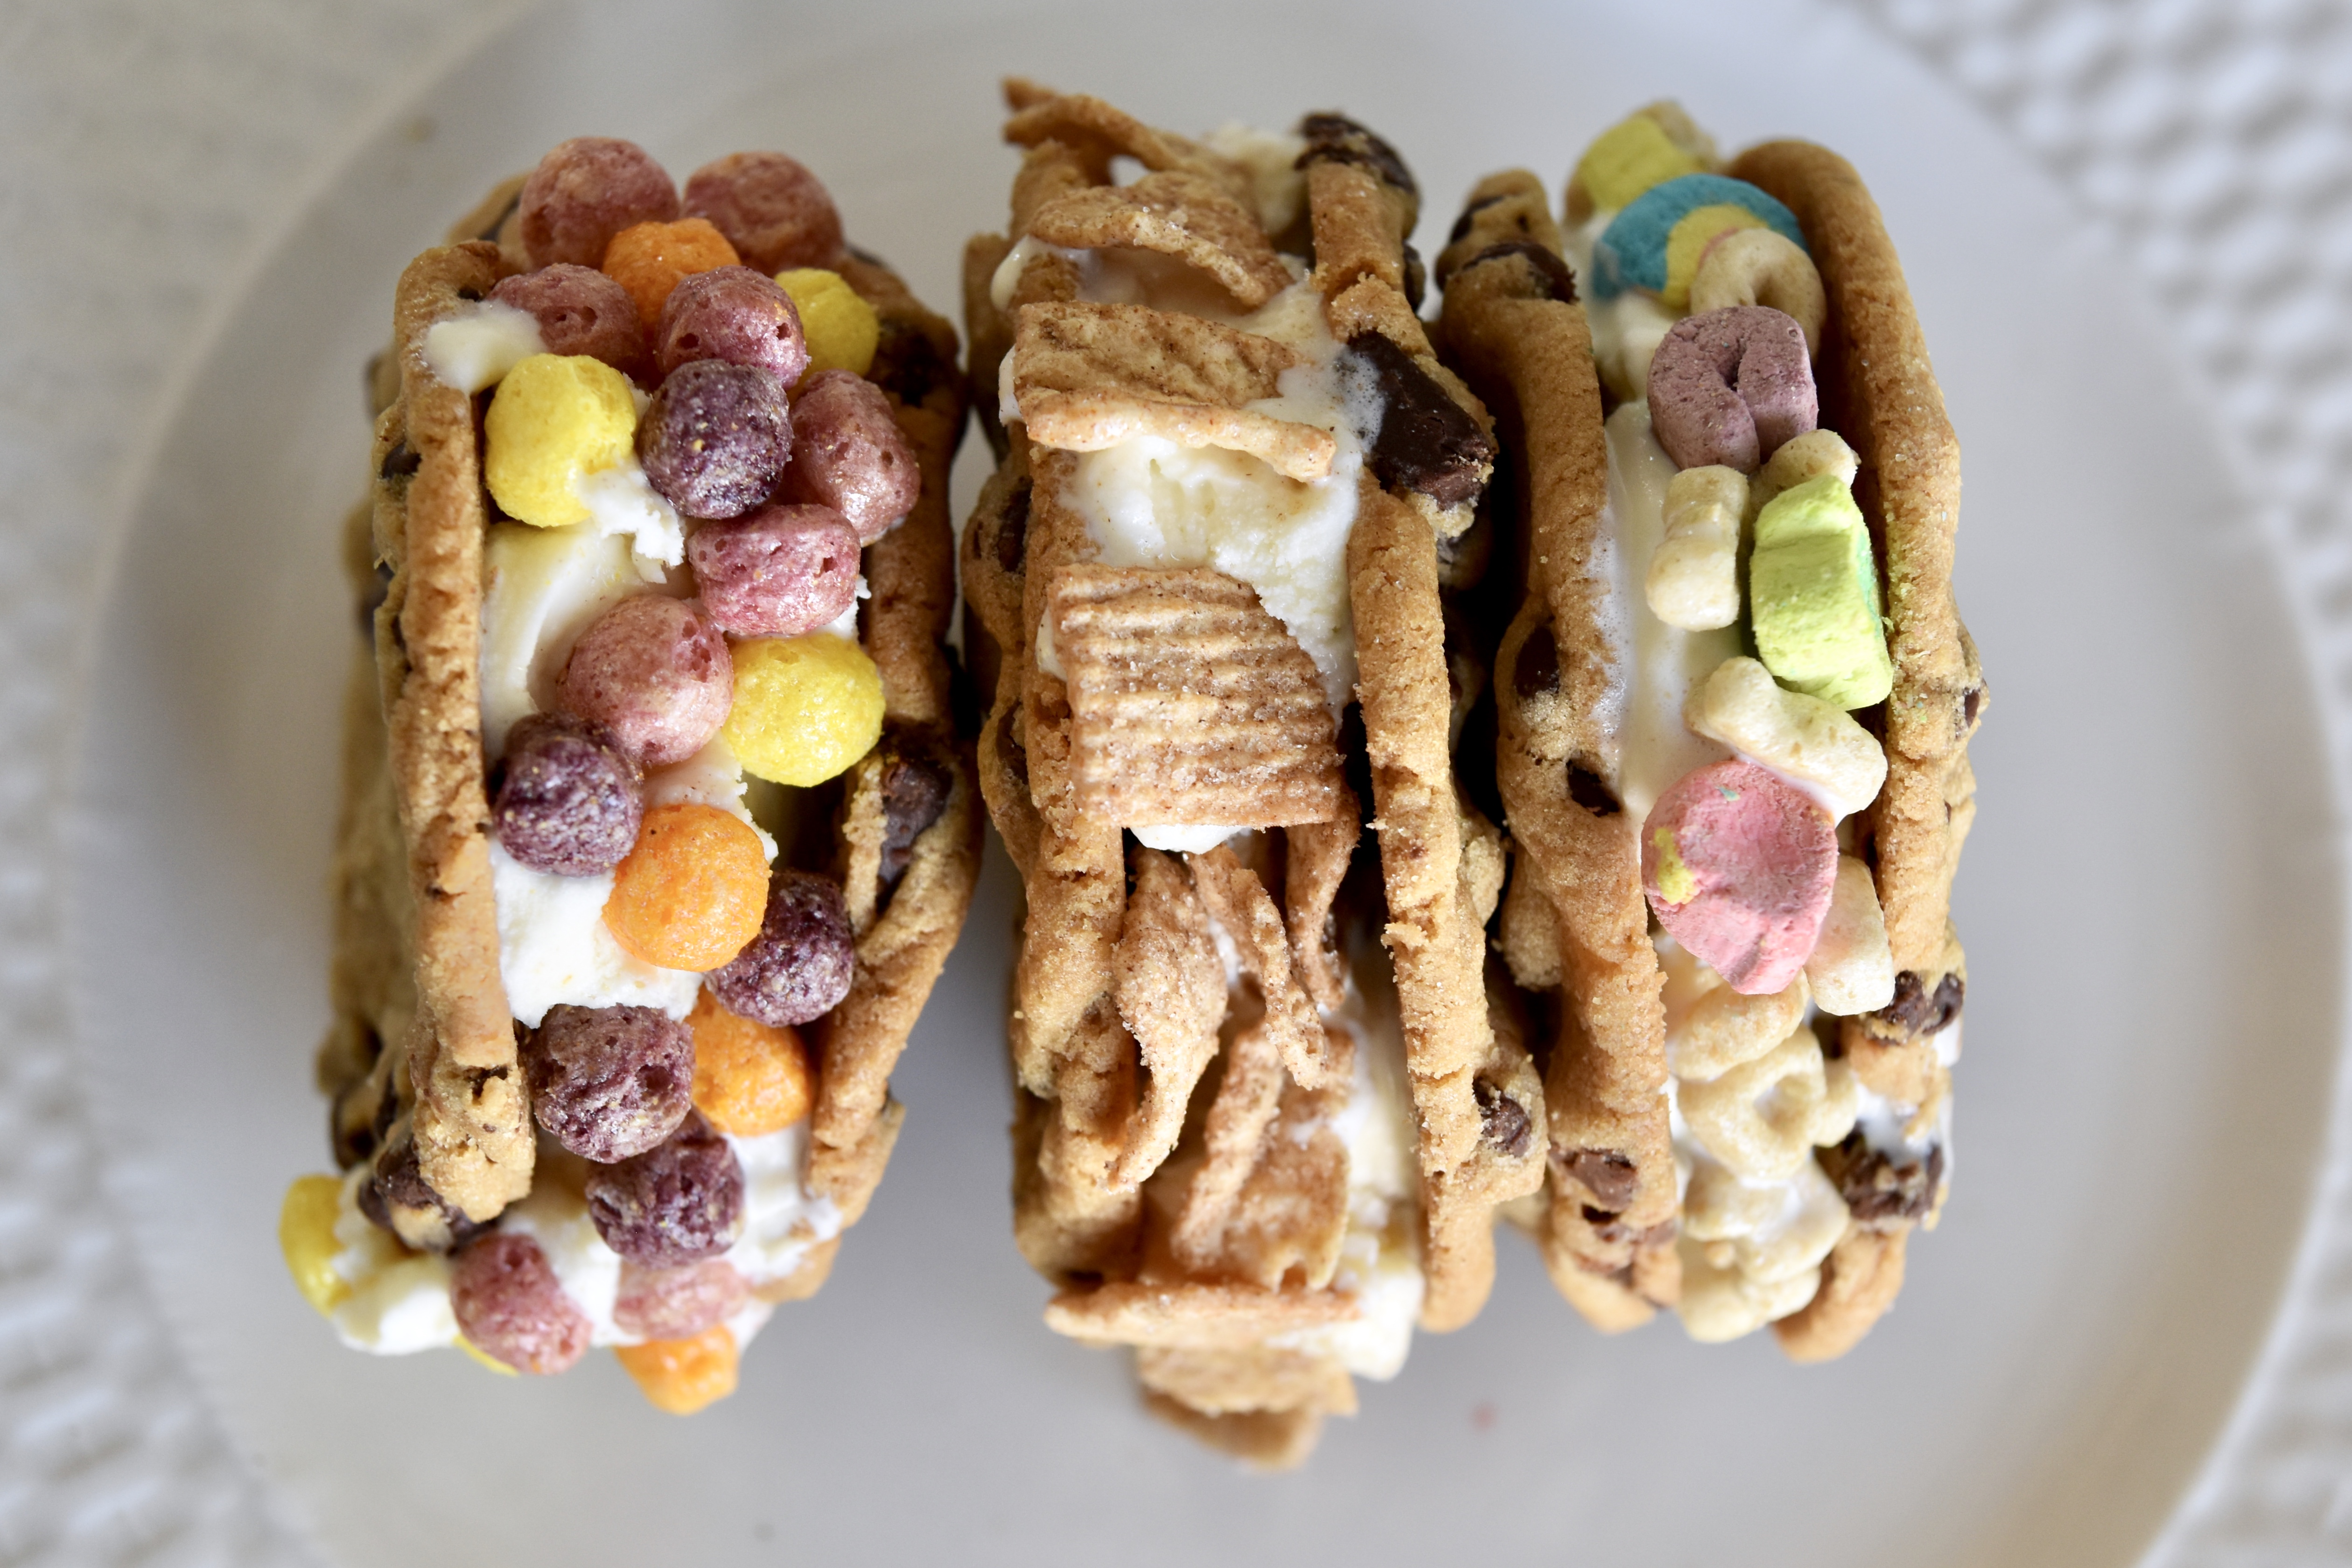 feature image of ice cream sandwiches with cereal